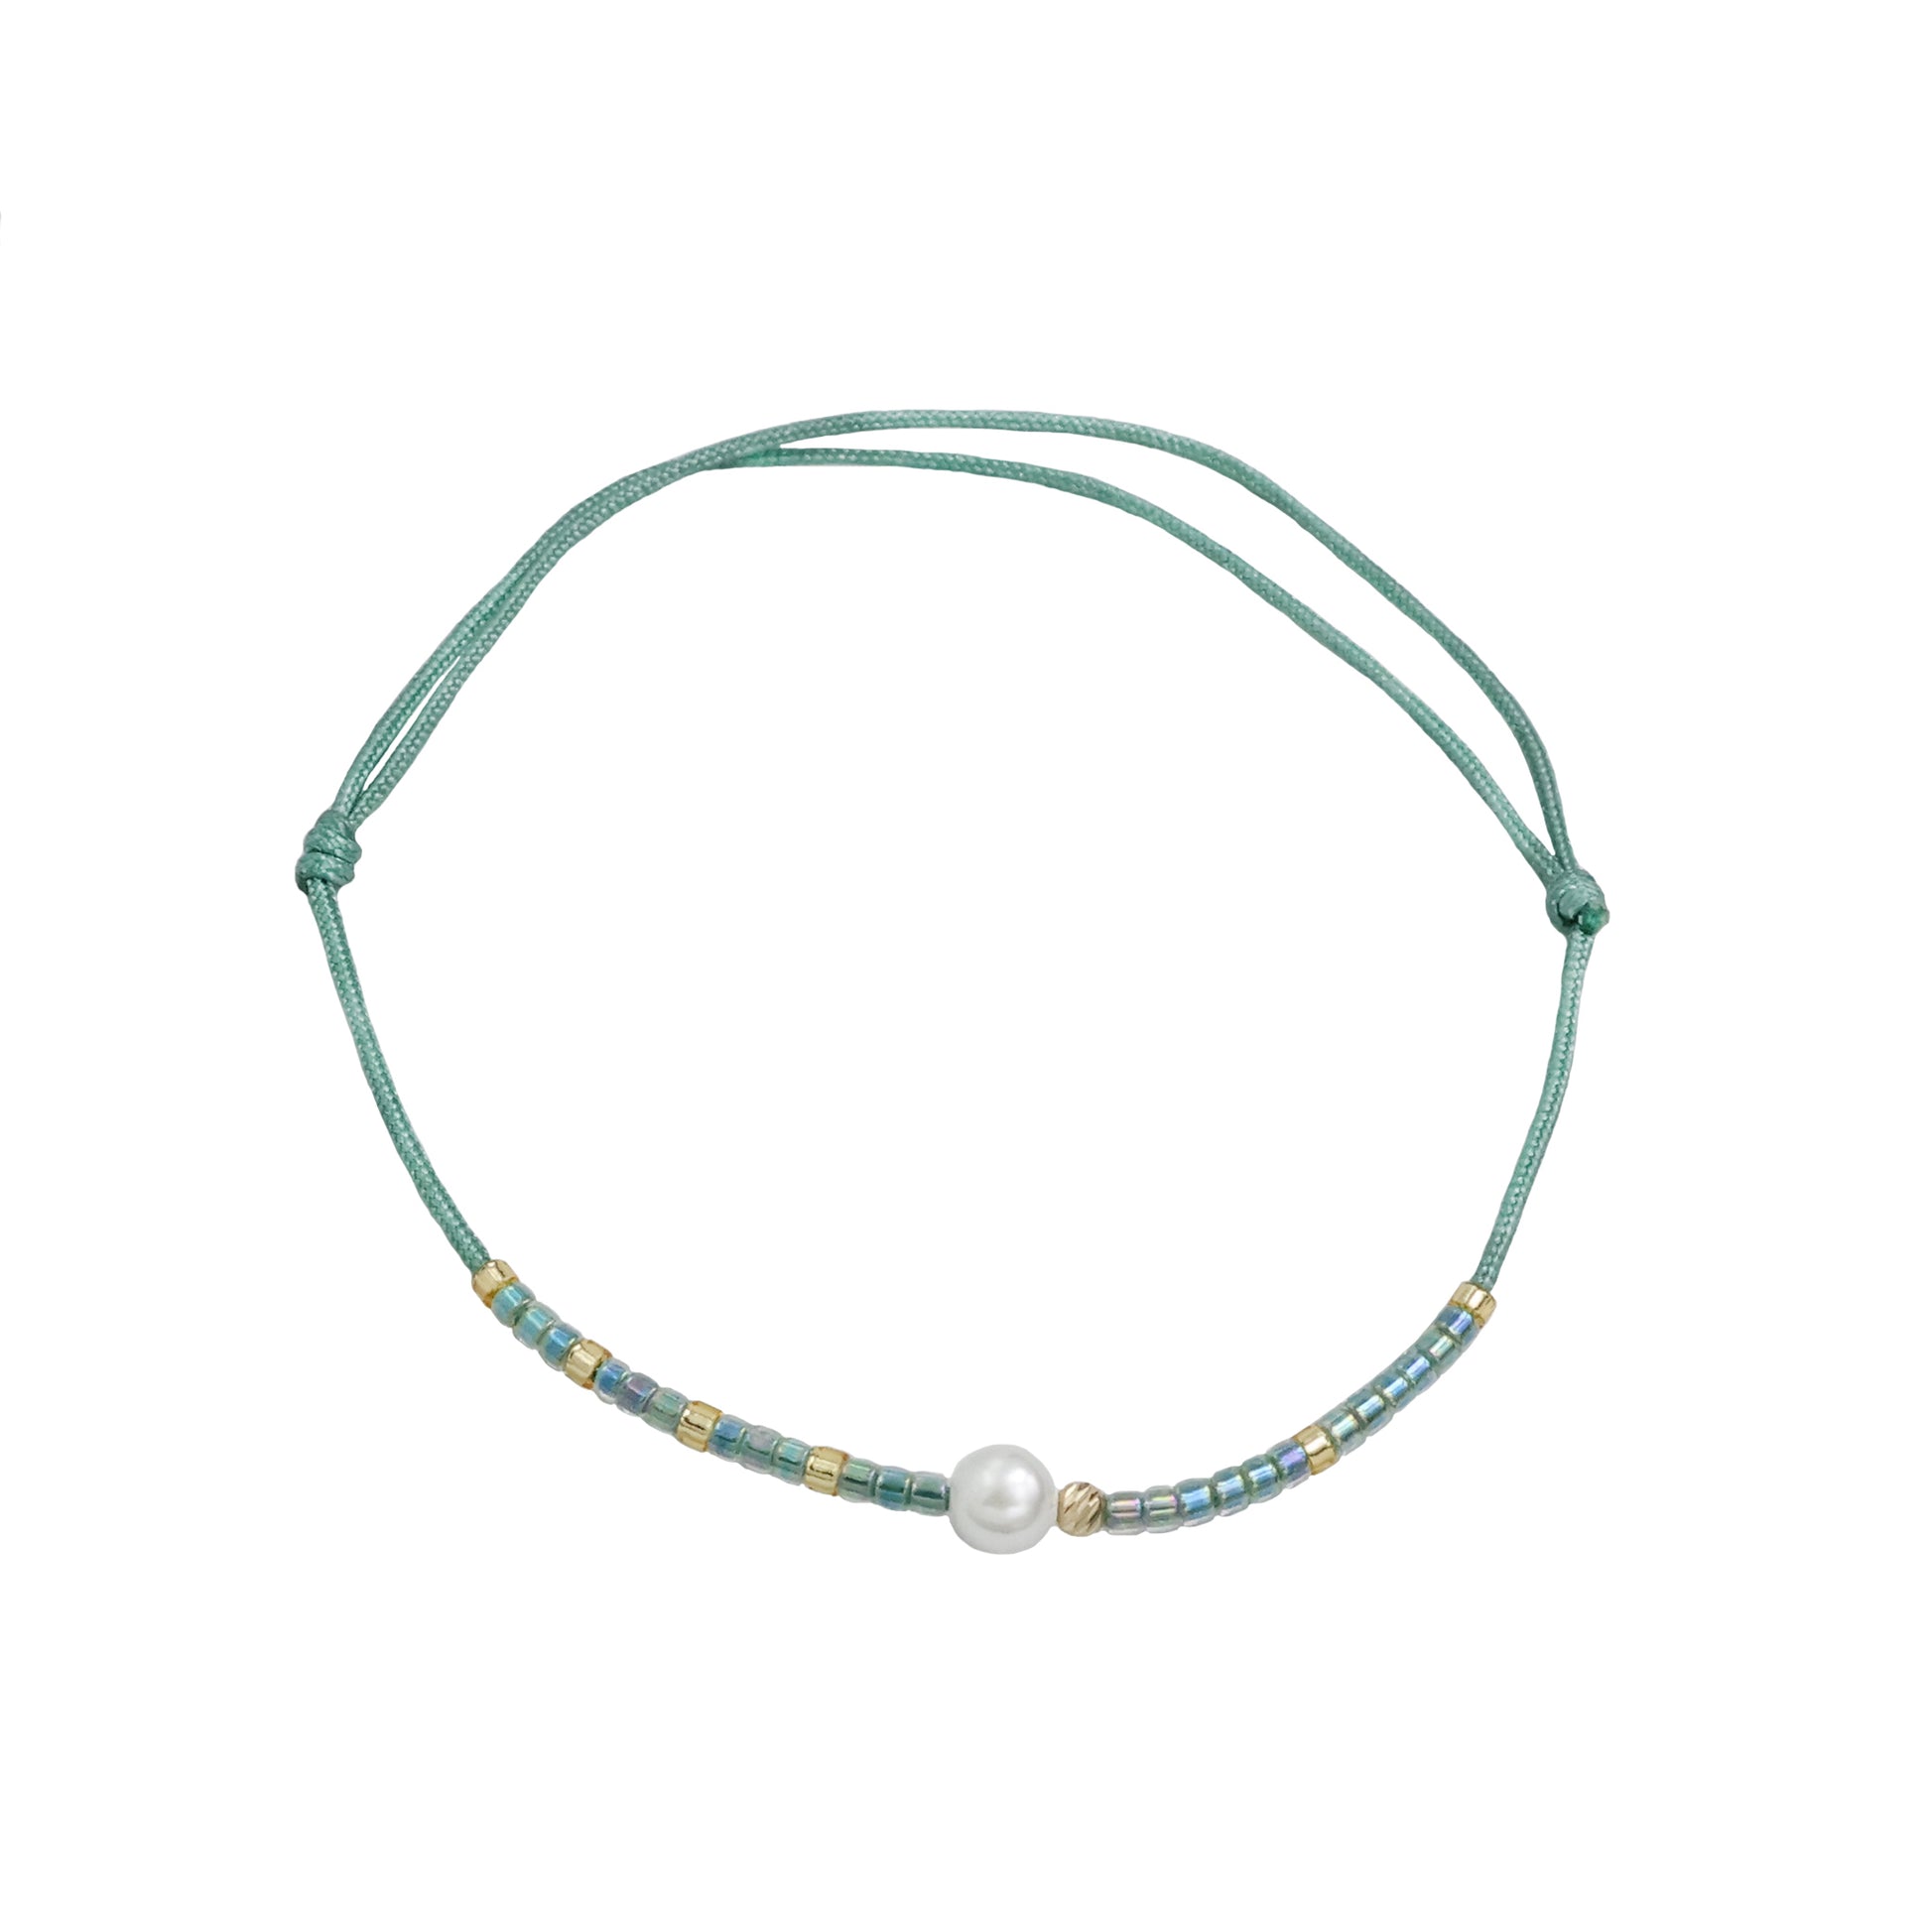 Bracelet with 1 bead of 14K solid gold, Miyuki beads and 1 artificial pearl-turquoise Vega Lopez